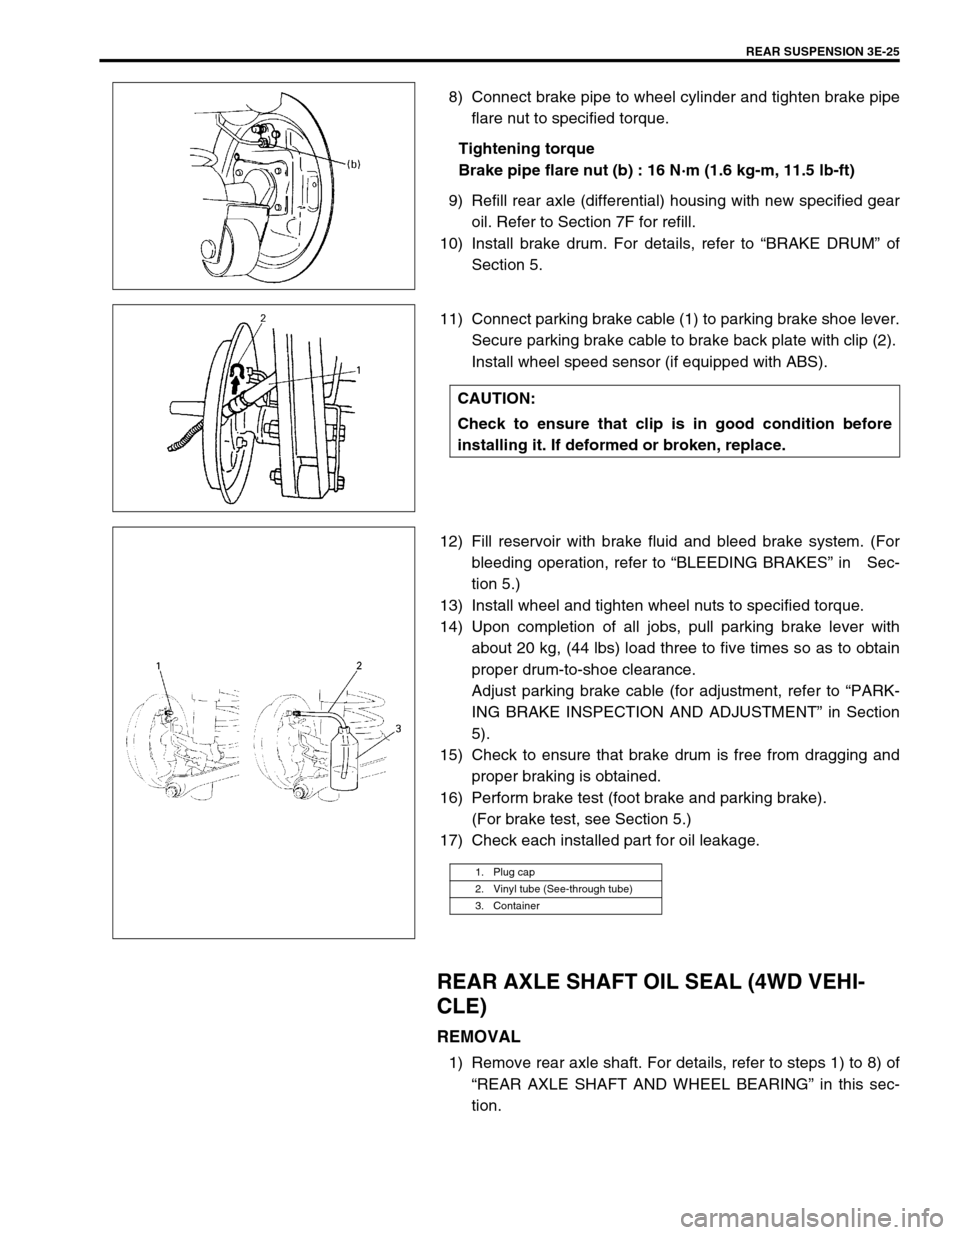 SUZUKI SWIFT 2000 1.G RG413 Service Workshop Manual REAR SUSPENSION 3E-25
8) Connect brake pipe to wheel cylinder and tighten brake pipe
flare nut to specified torque.
Tightening torque
Brake pipe flare nut (b) : 16 N·m (1.6 kg-m, 11.5 lb-ft)
9) Refil